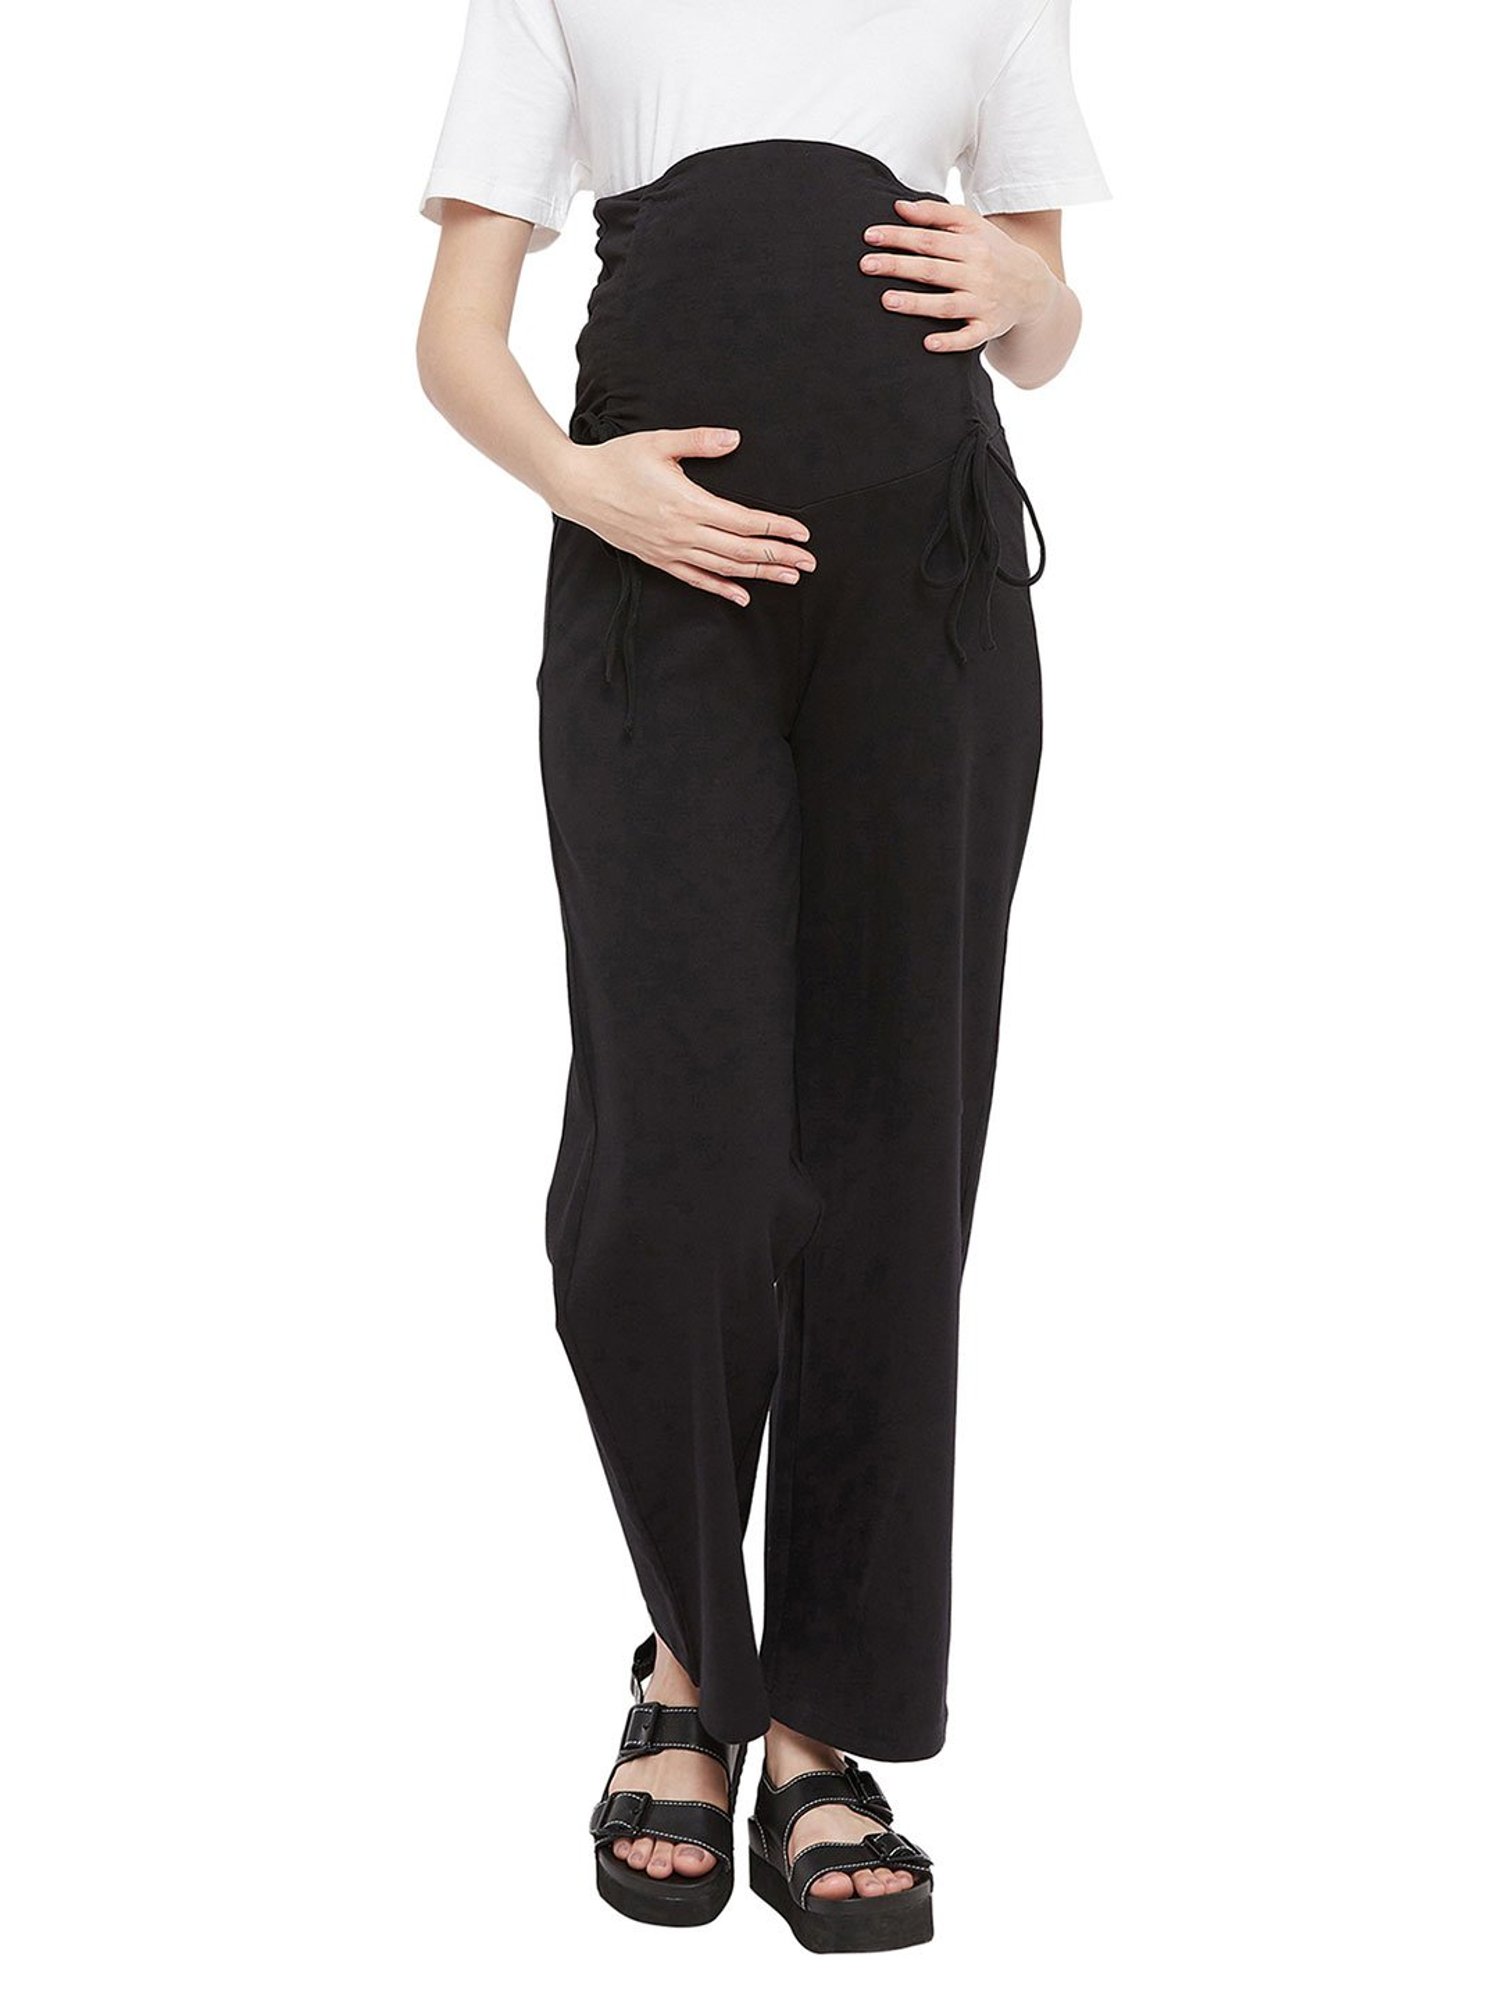 High Waisted Cotton Maternity Trousers  Green  Wobbly Walk